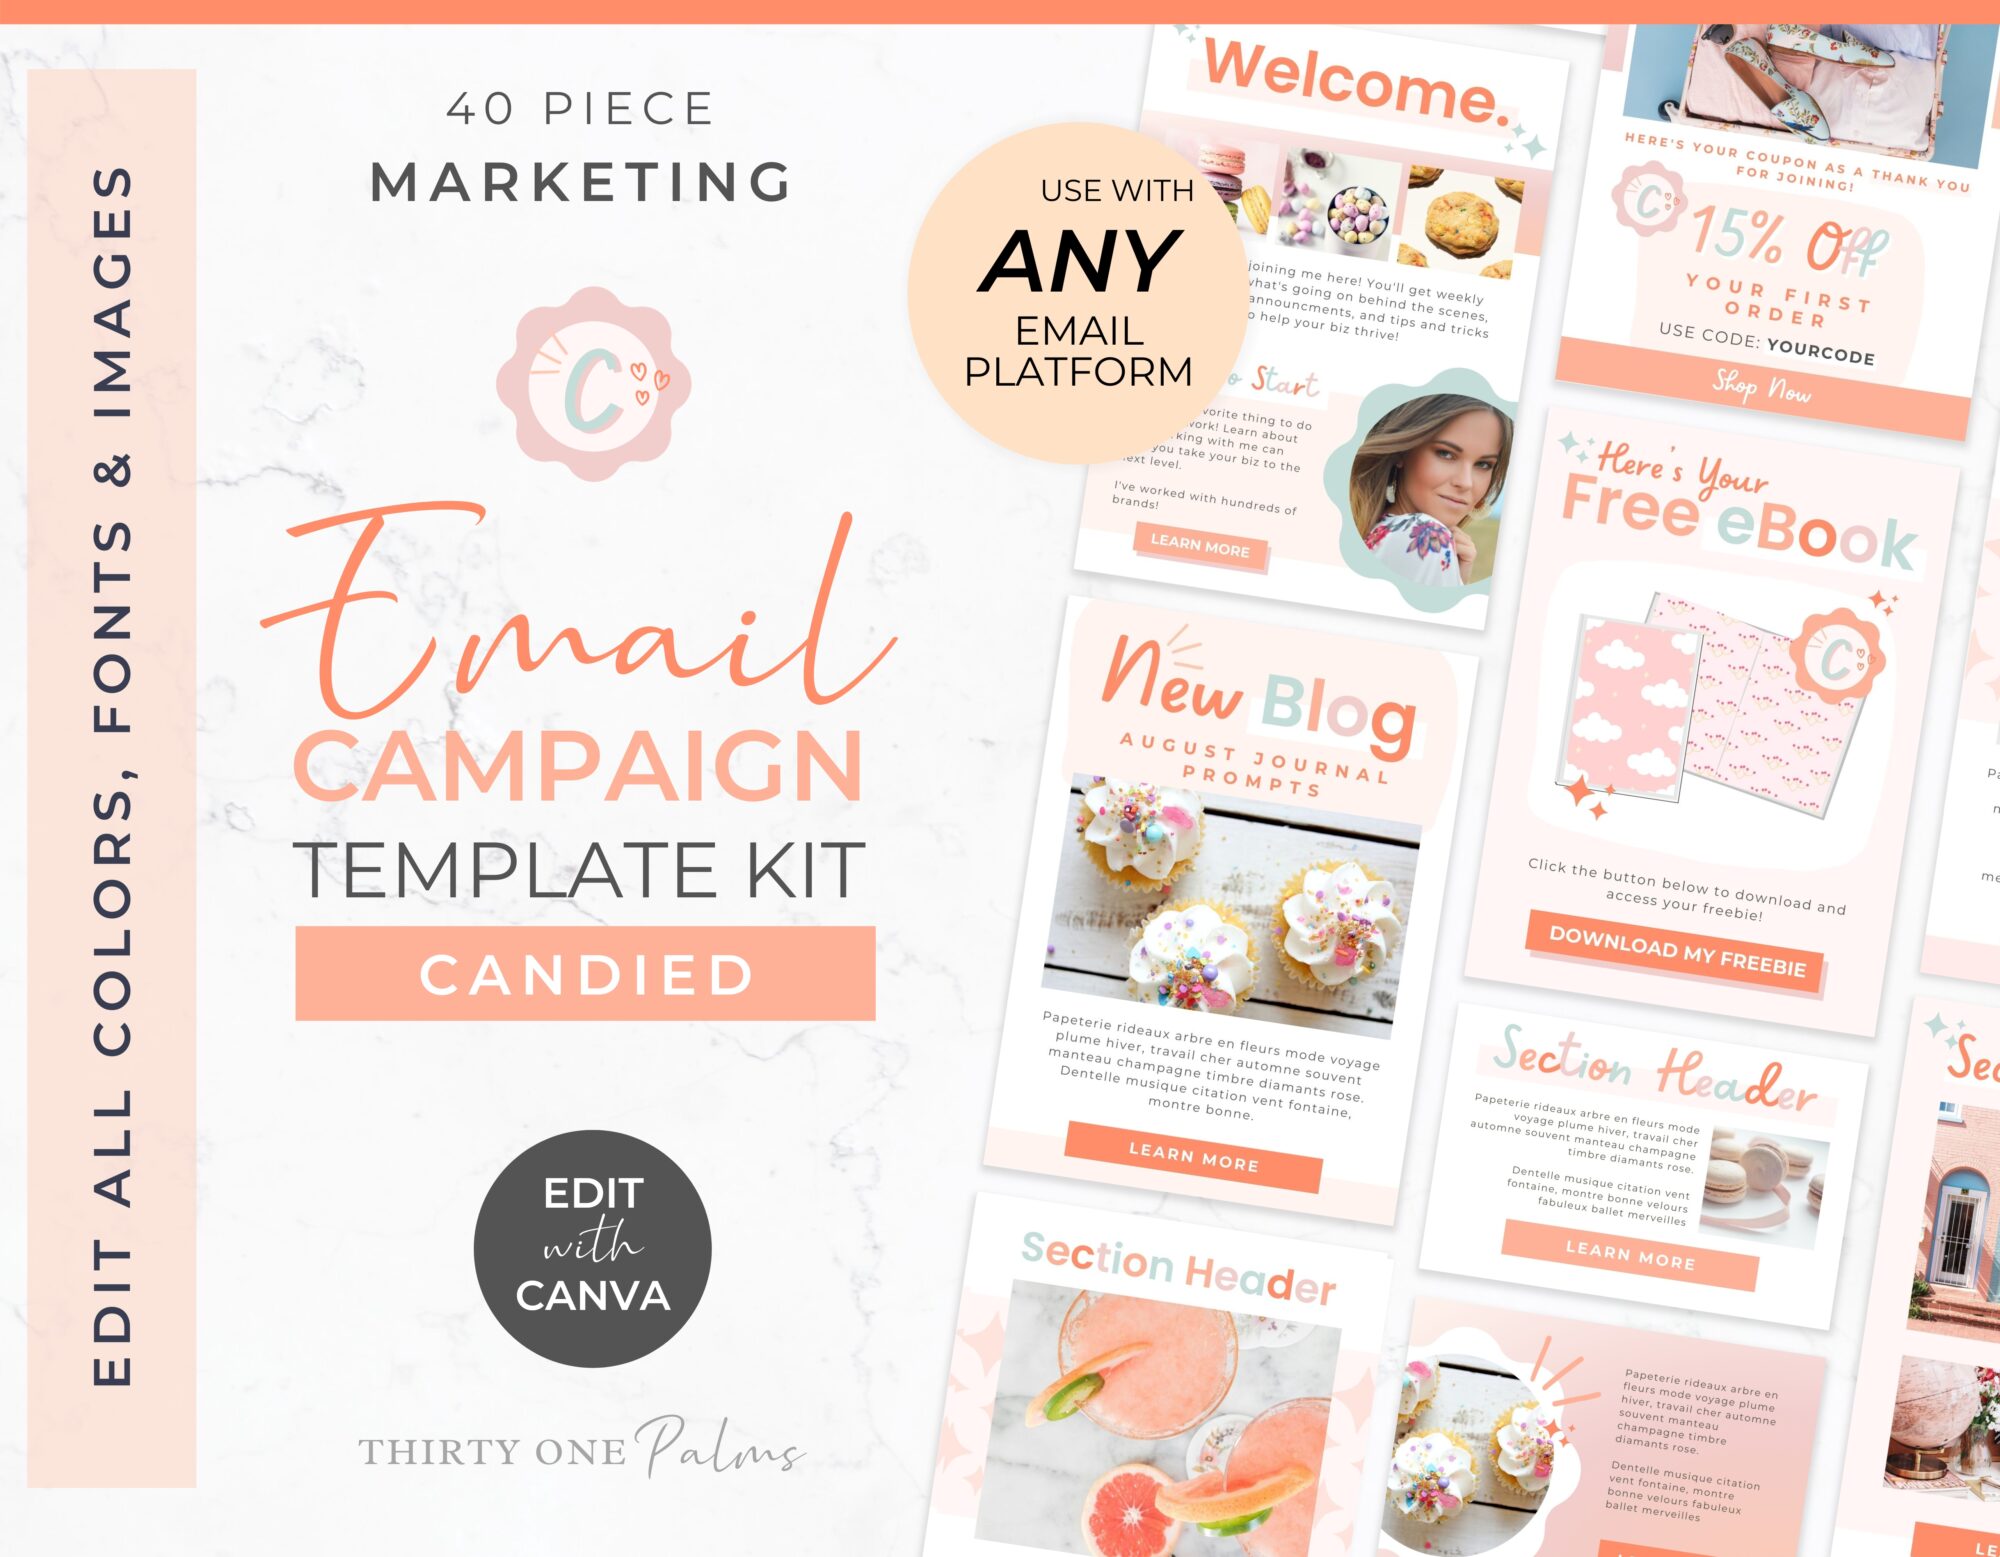 Email Marketing Campaign Template Kit – Candied